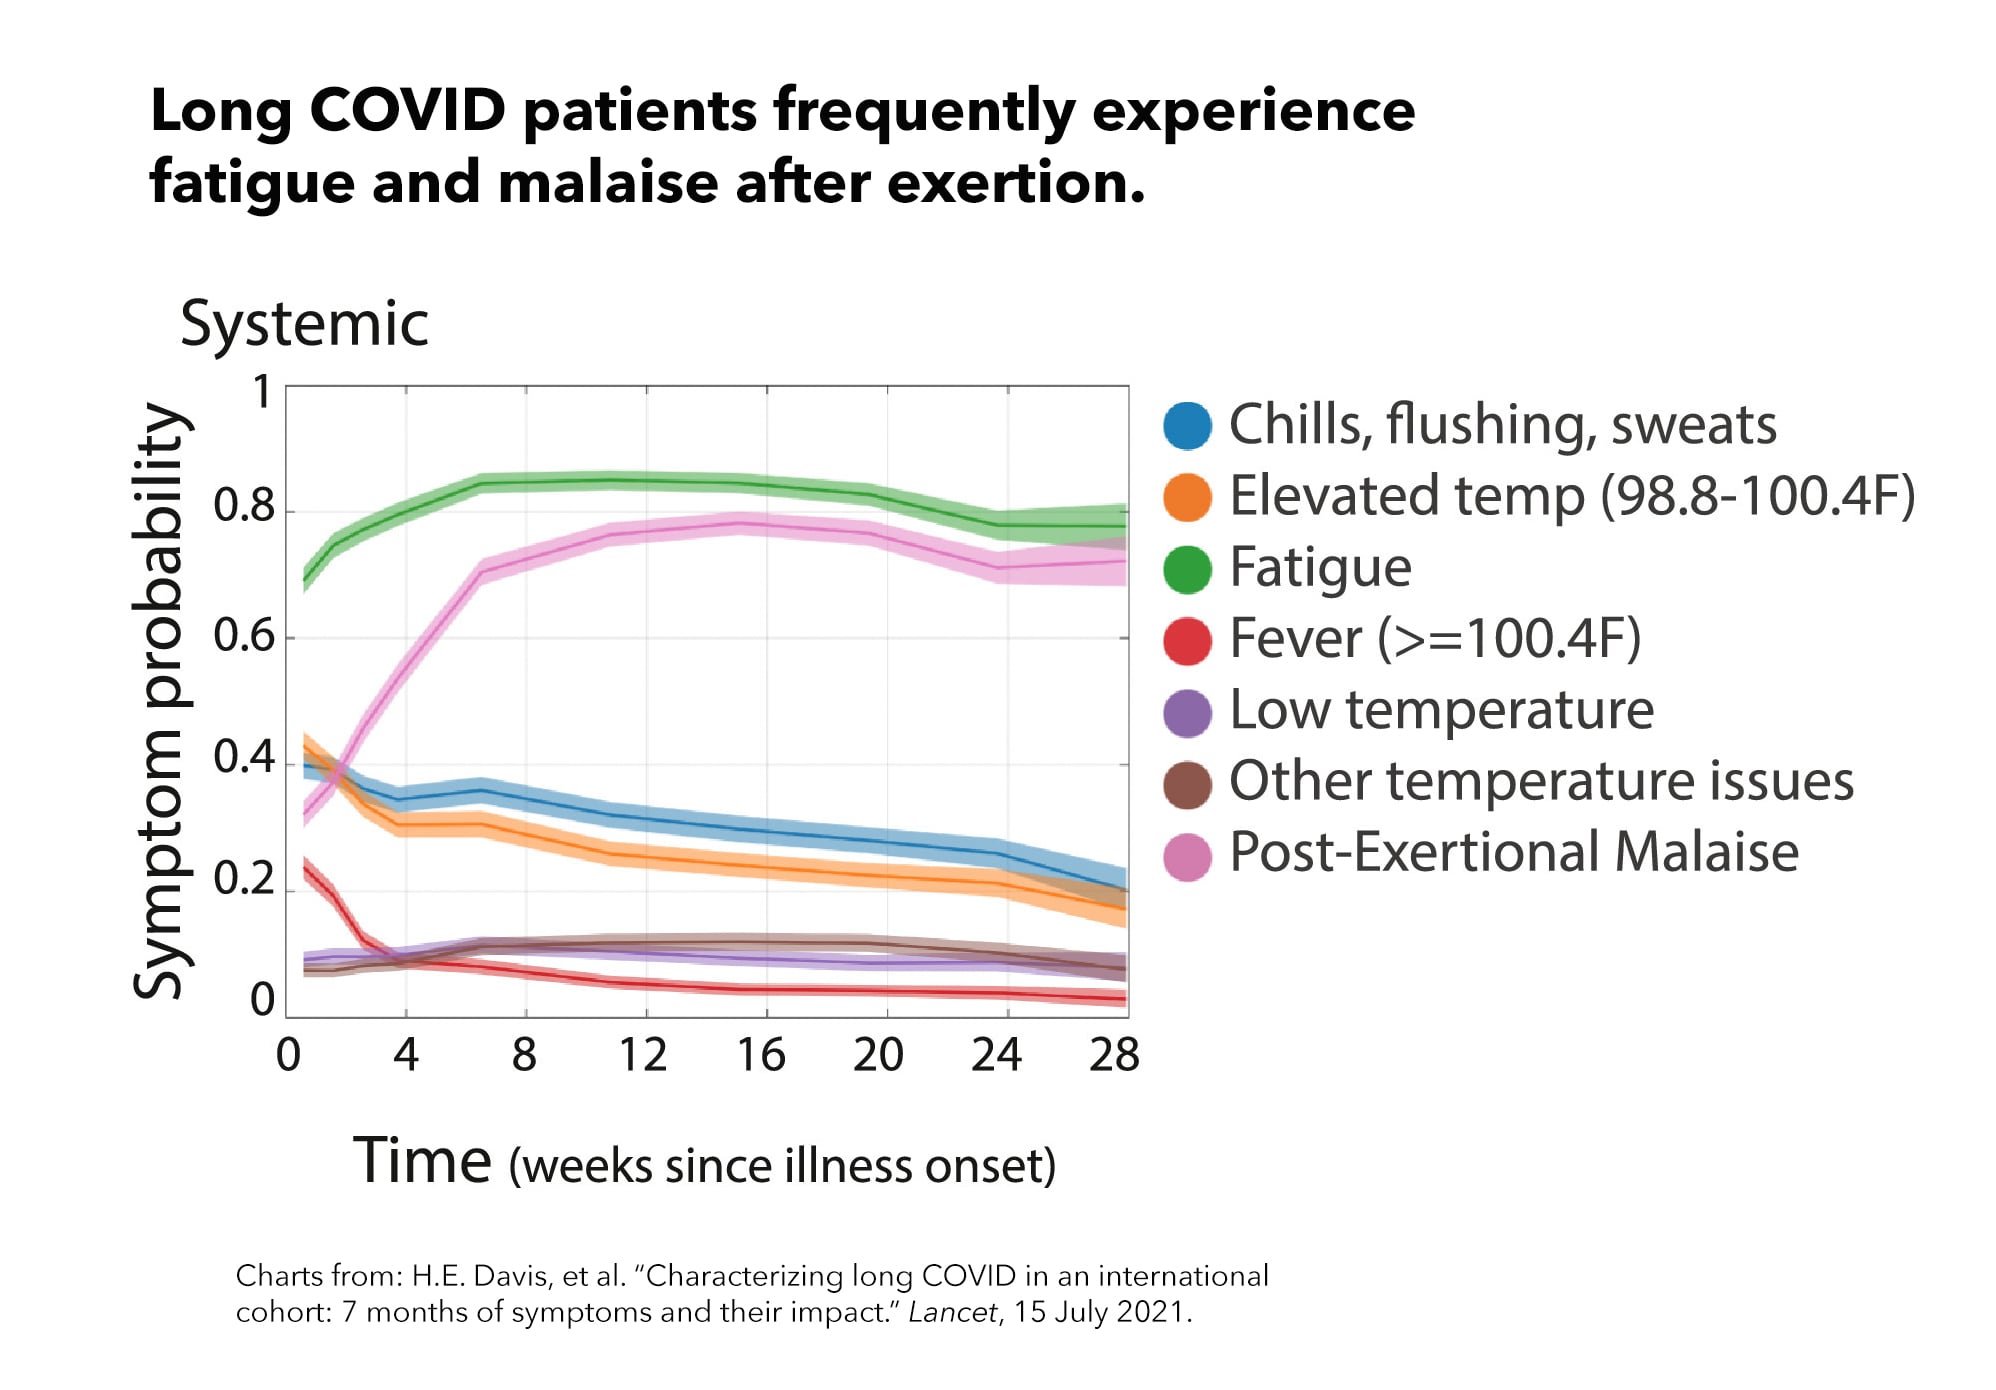 Graphic shows long covid patients frequently experiencing fatigue and malaise after exertion